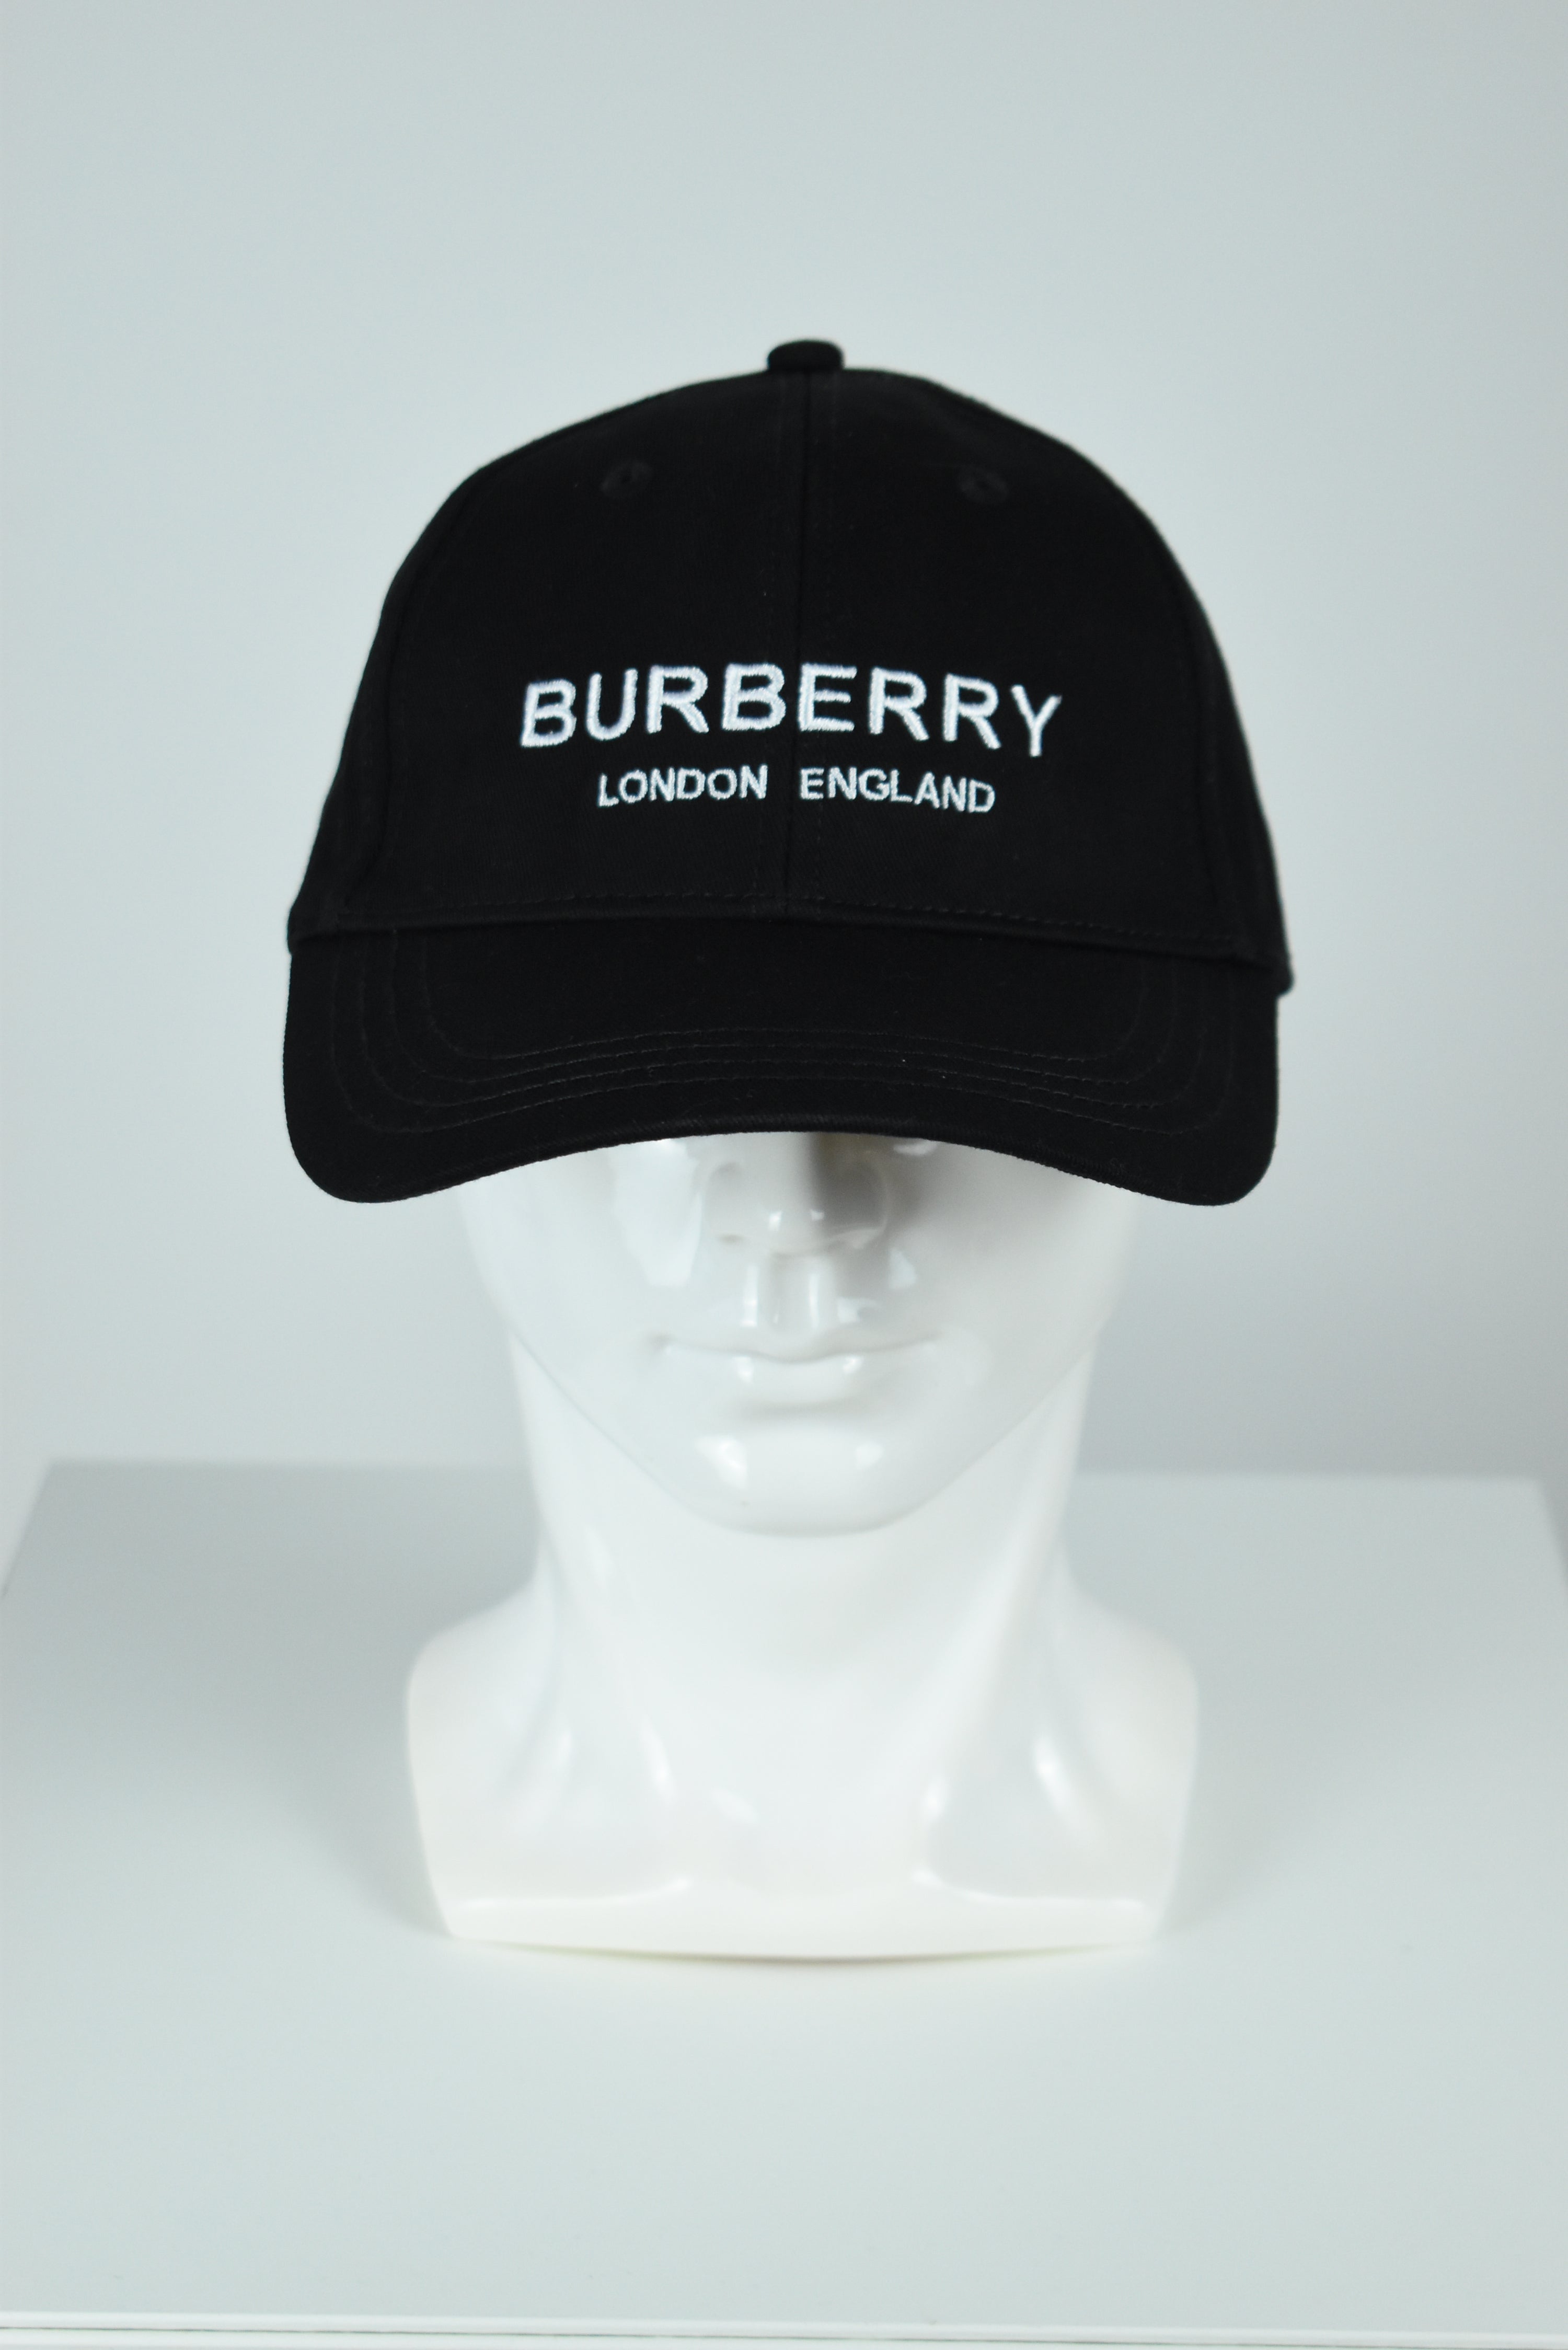 New Burberry Embroidery Cap Black OS